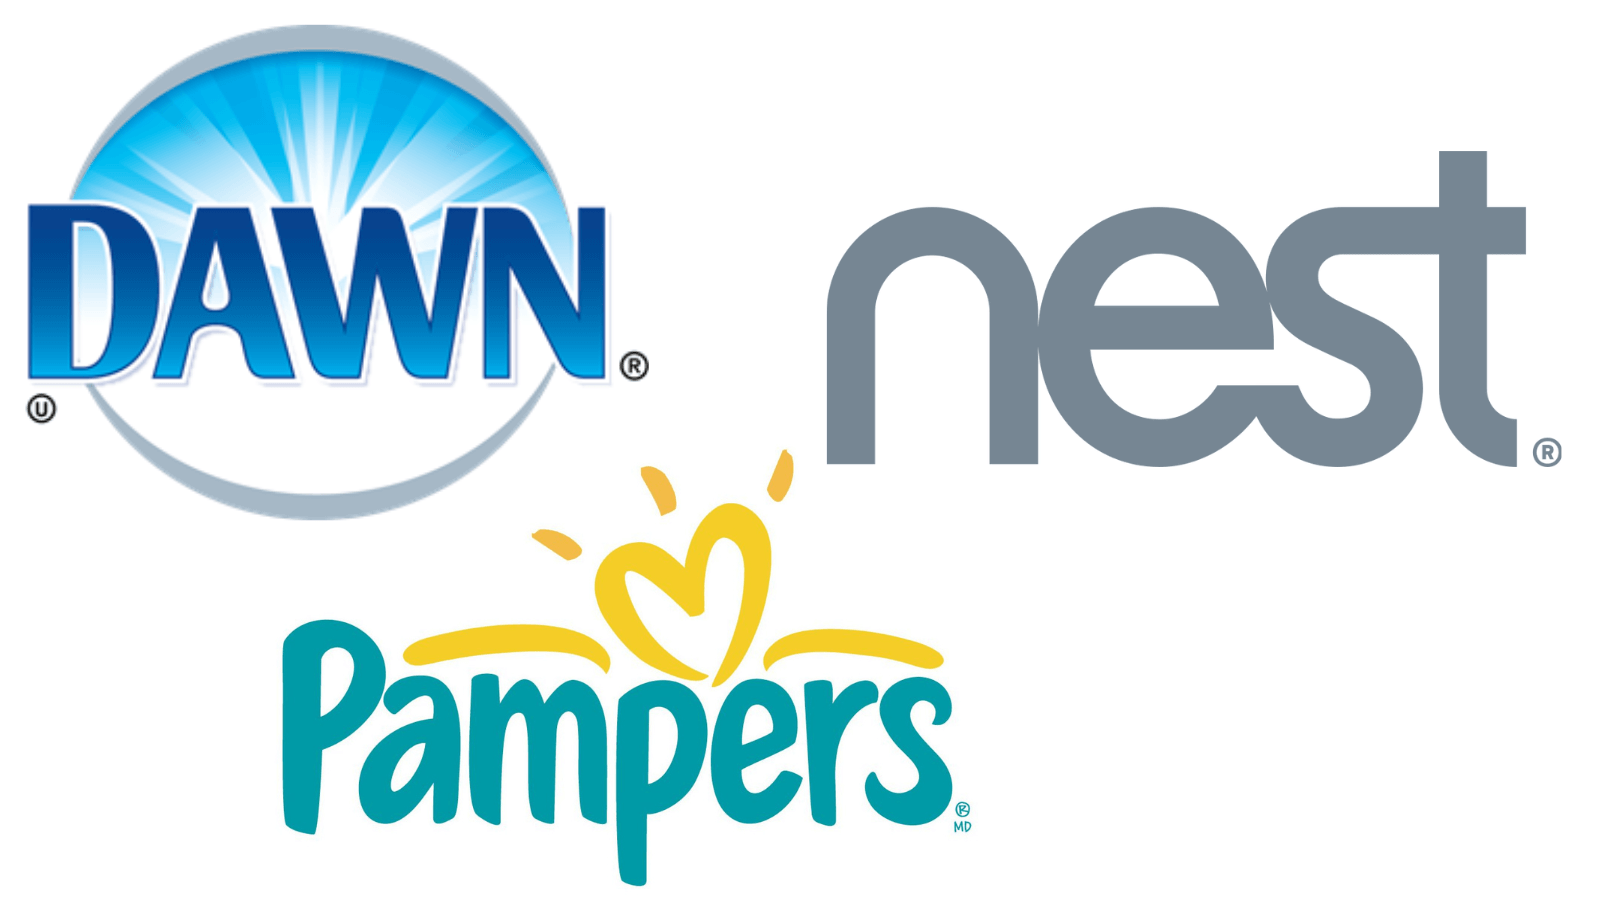 The logos for Dawn, Nest, and Pampers